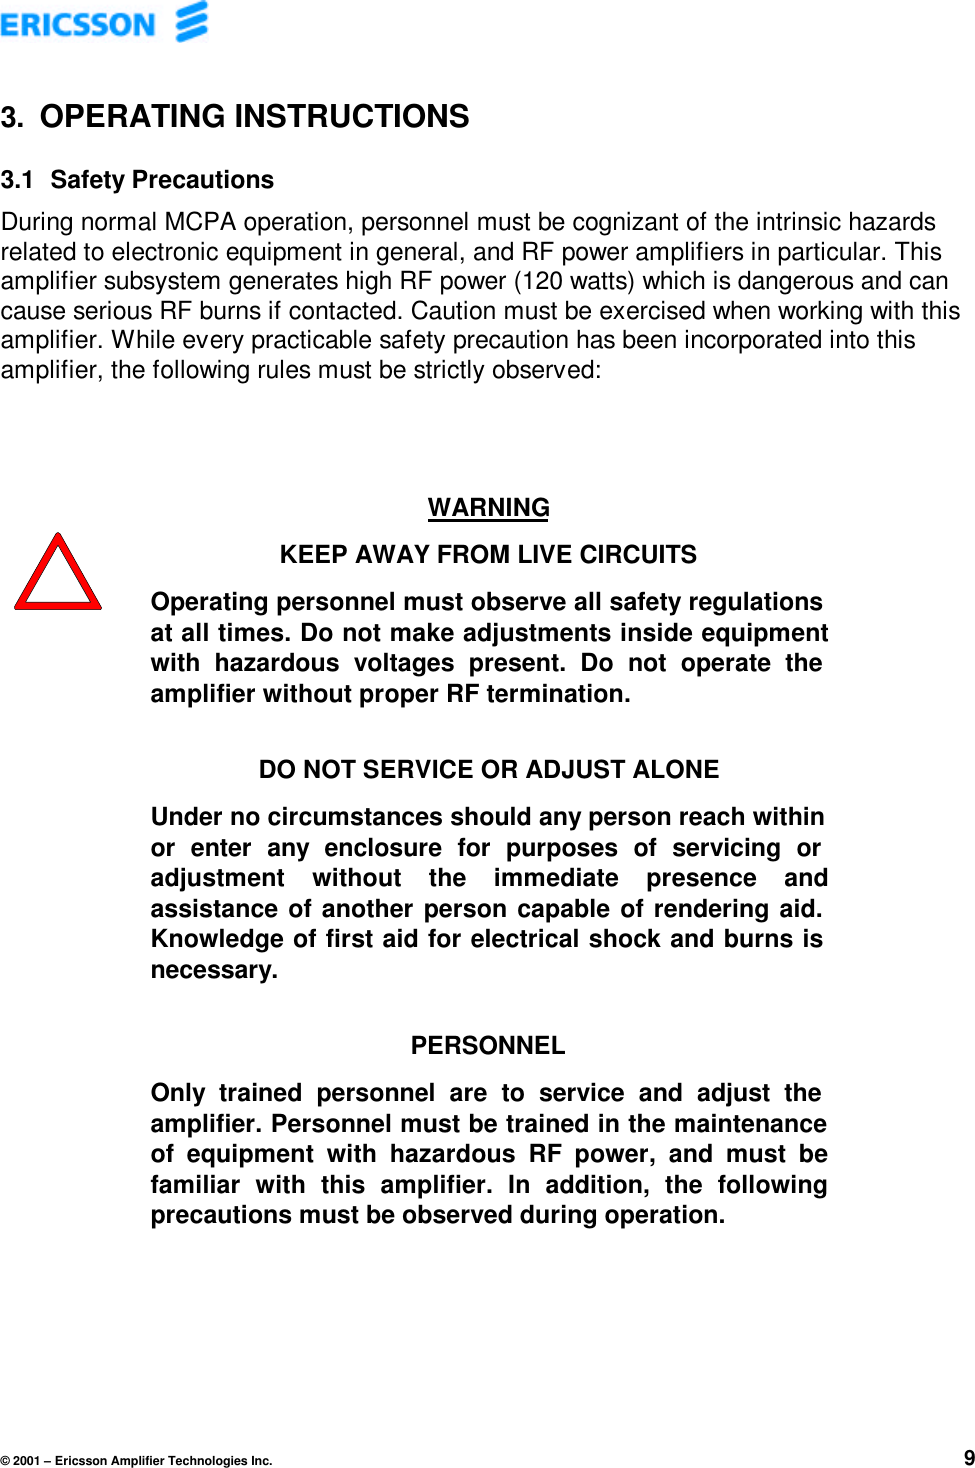 © 2001 – Ericsson Amplifier Technologies Inc. 93. OPERATING INSTRUCTIONS3.1  Safety PrecautionsDuring normal MCPA operation, personnel must be cognizant of the intrinsic hazardsrelated to electronic equipment in general, and RF power amplifiers in particular. Thisamplifier subsystem generates high RF power (120 watts) which is dangerous and cancause serious RF burns if contacted. Caution must be exercised when working with thisamplifier. While every practicable safety precaution has been incorporated into thisamplifier, the following rules must be strictly observed:WARNINGKEEP AWAY FROM LIVE CIRCUITSOperating personnel must observe all safety regulationsat all times. Do not make adjustments inside equipmentwith hazardous voltages present. Do not operate theamplifier without proper RF termination.DO NOT SERVICE OR ADJUST ALONEUnder no circumstances should any person reach withinor enter any enclosure for purposes of servicing oradjustment without the immediate presence andassistance of another person capable of rendering aid.Knowledge of first aid for electrical shock and burns isnecessary.PERSONNELOnly trained personnel are to service and adjust theamplifier. Personnel must be trained in the maintenanceof equipment with hazardous RF power, and must befamiliar with this amplifier. In addition, the followingprecautions must be observed during operation.